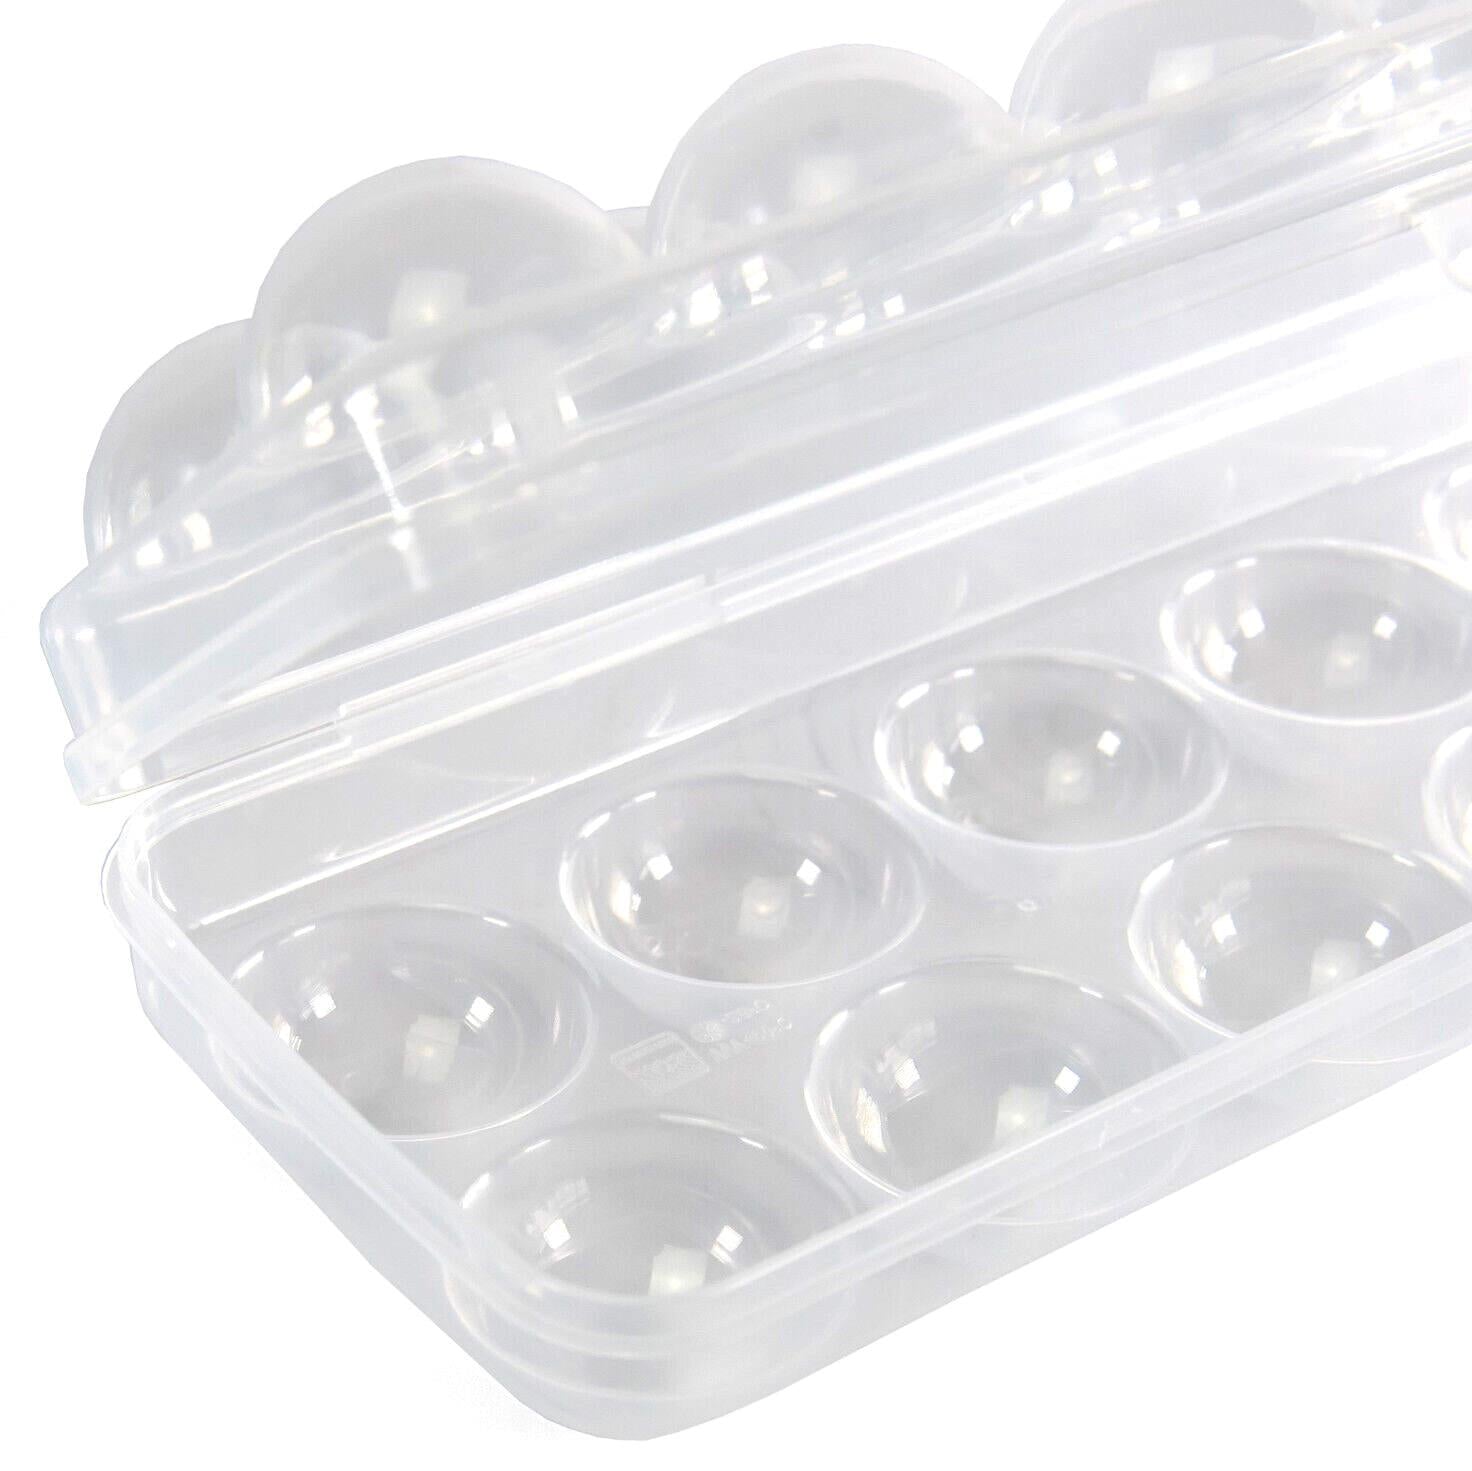 12 Eggs Holder With Lid by GEEZY - The Magic Toy Shop